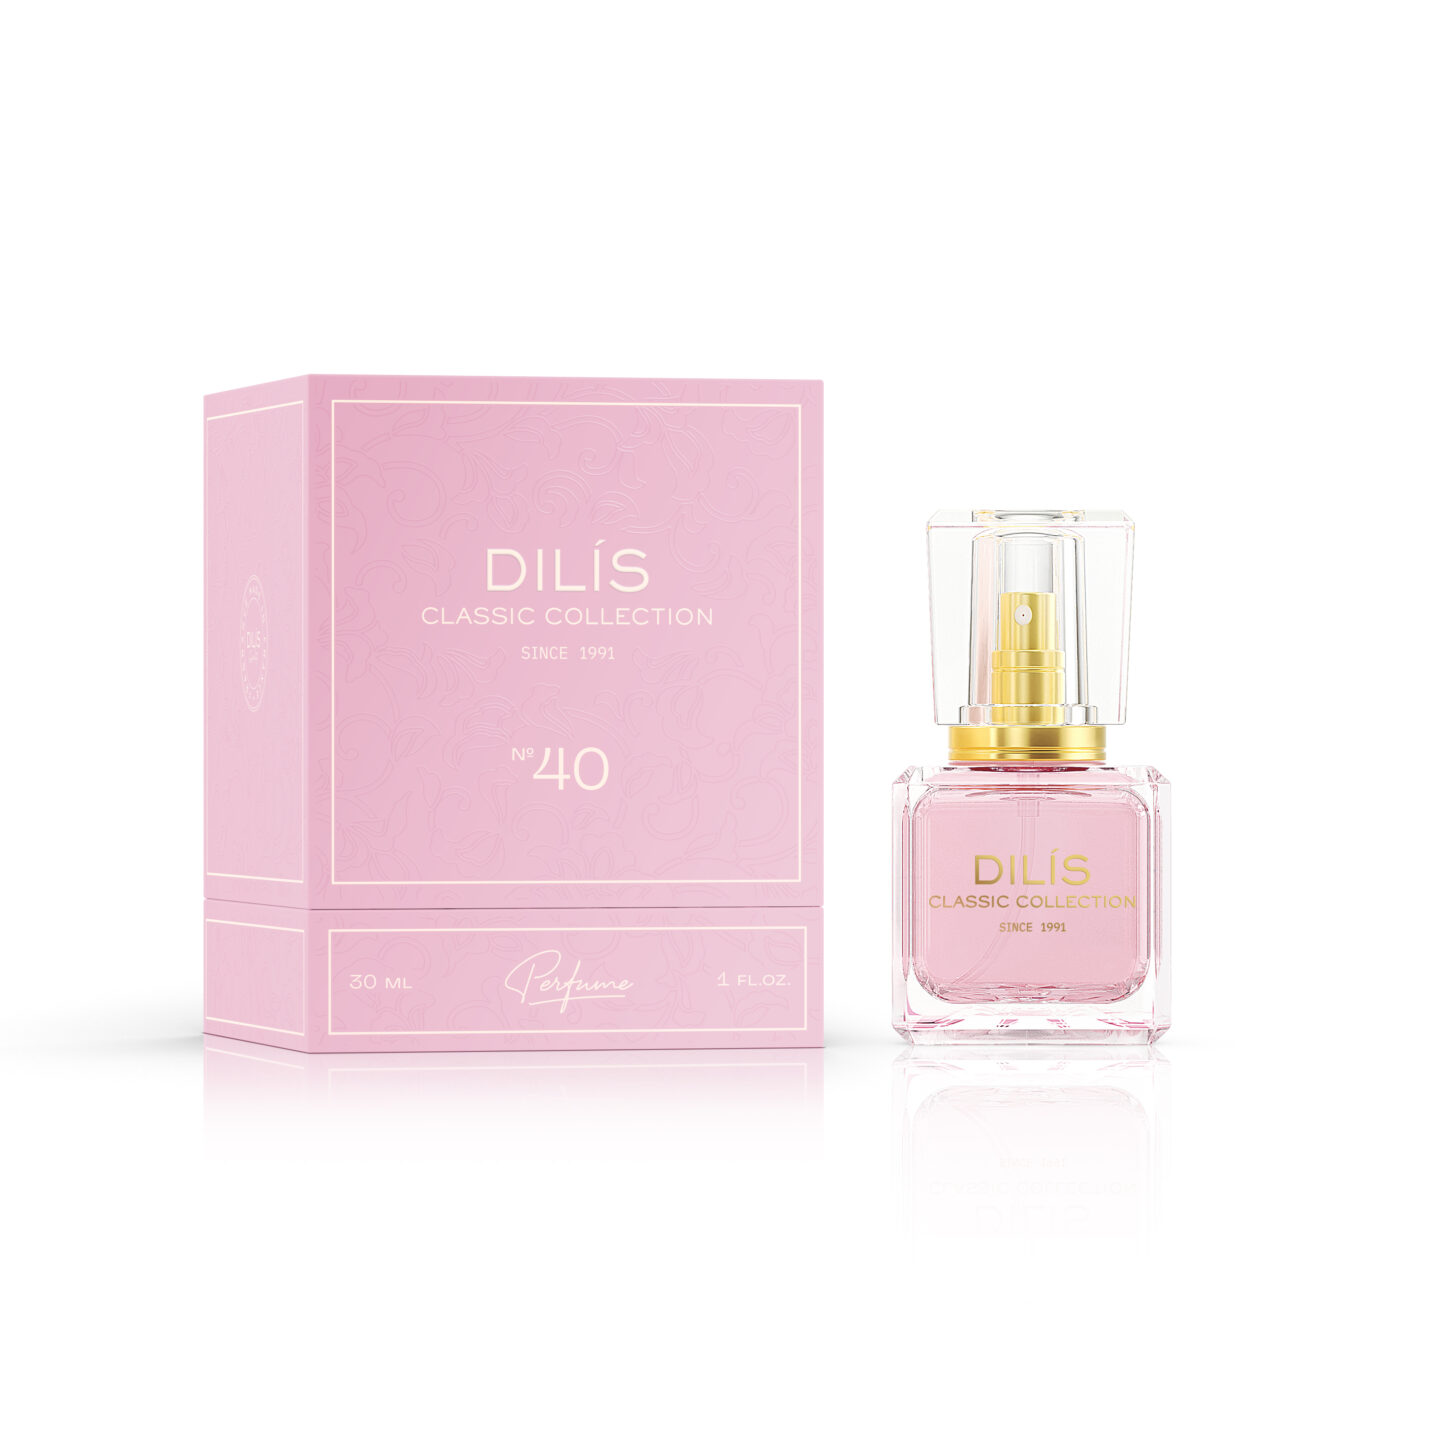 Духи экстра Dilis Classic Collection №40 30 мл*10